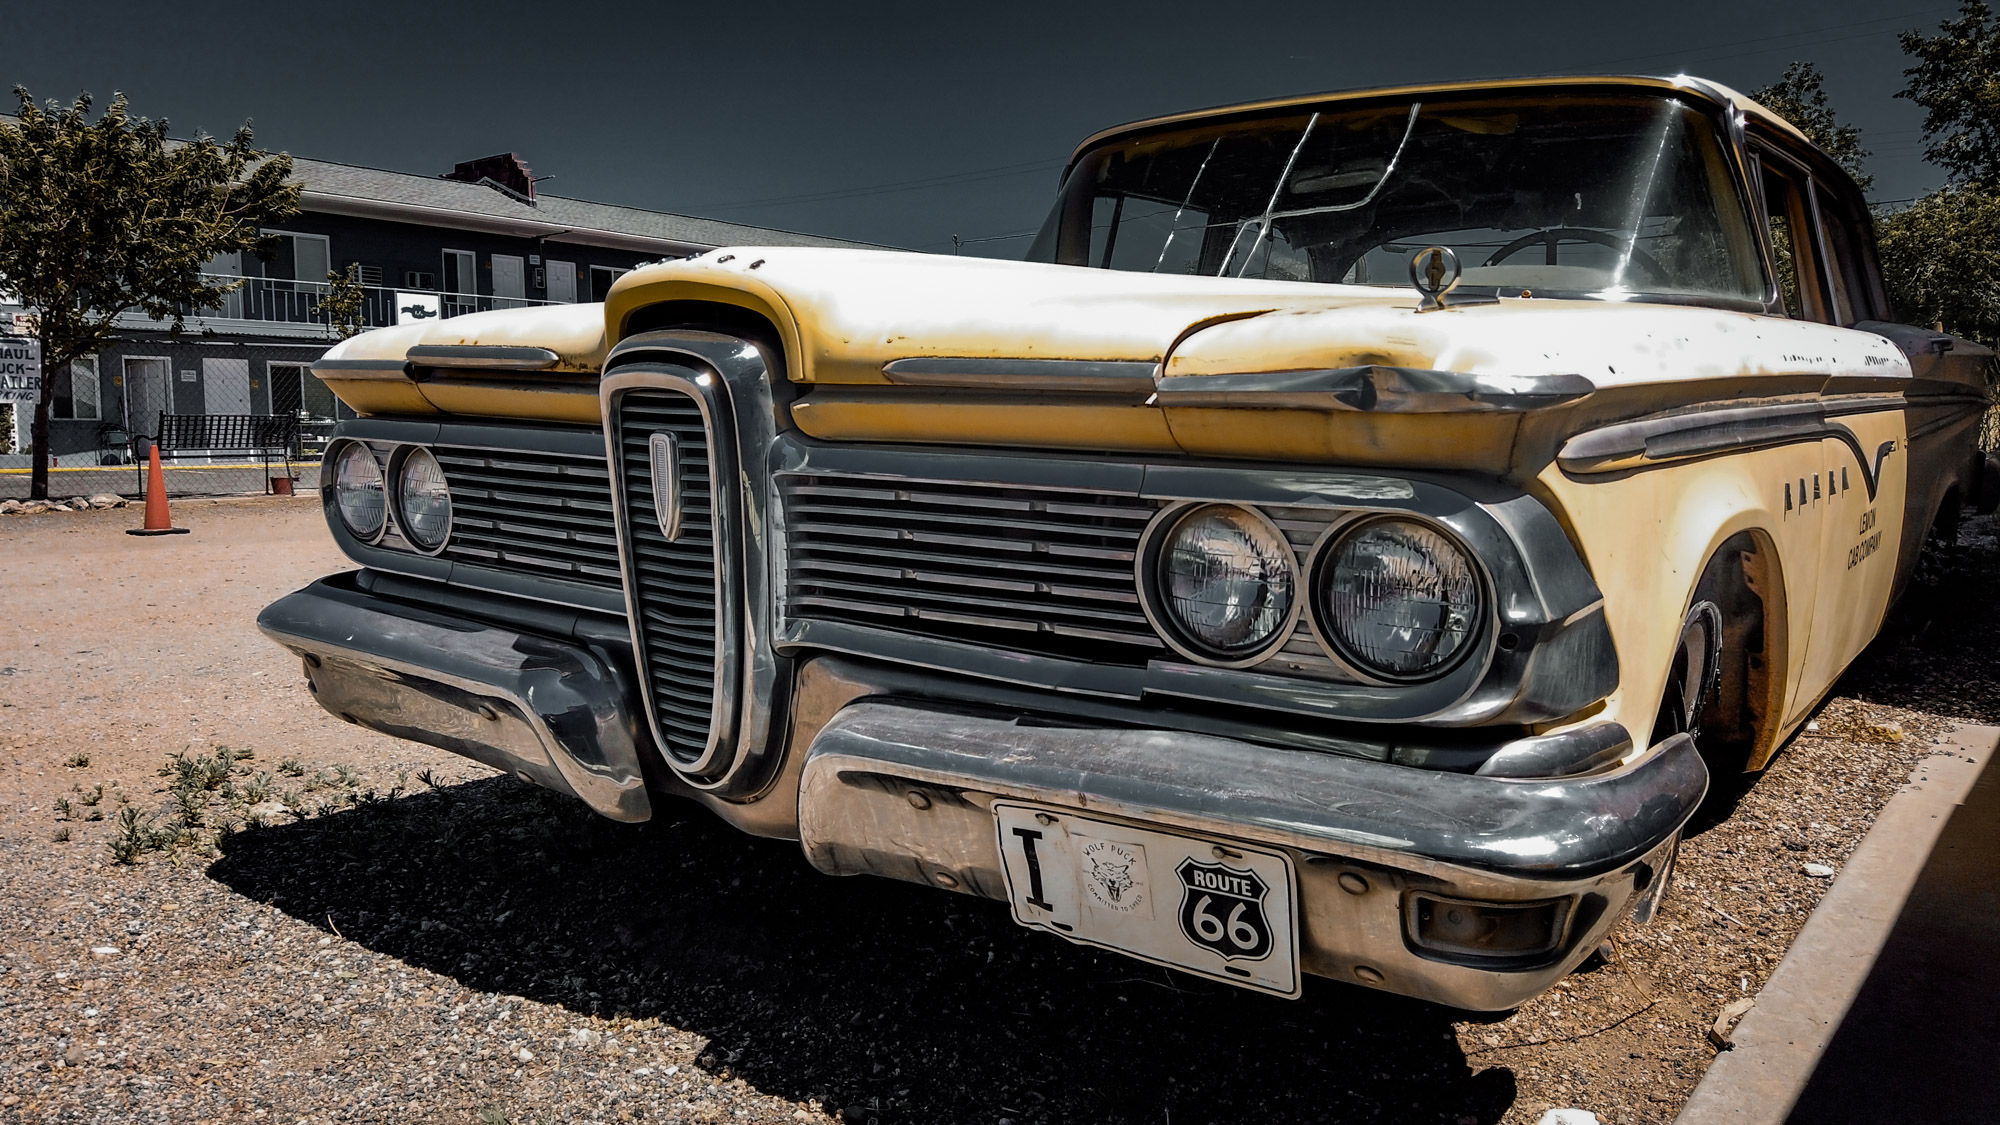 The Edsel line of cars was designed to honor a man who cherished design above all else. Yet, it was considered a failure upon launch, especially for its design. Ironically, time has been kind to the design of this car. The rust and patina adding a character and depth, giving it a gravitas it once lacked, as it watches over the remains of Route 66 - still holding strong due to preservation efforts in the town of Seligman, Arizona.